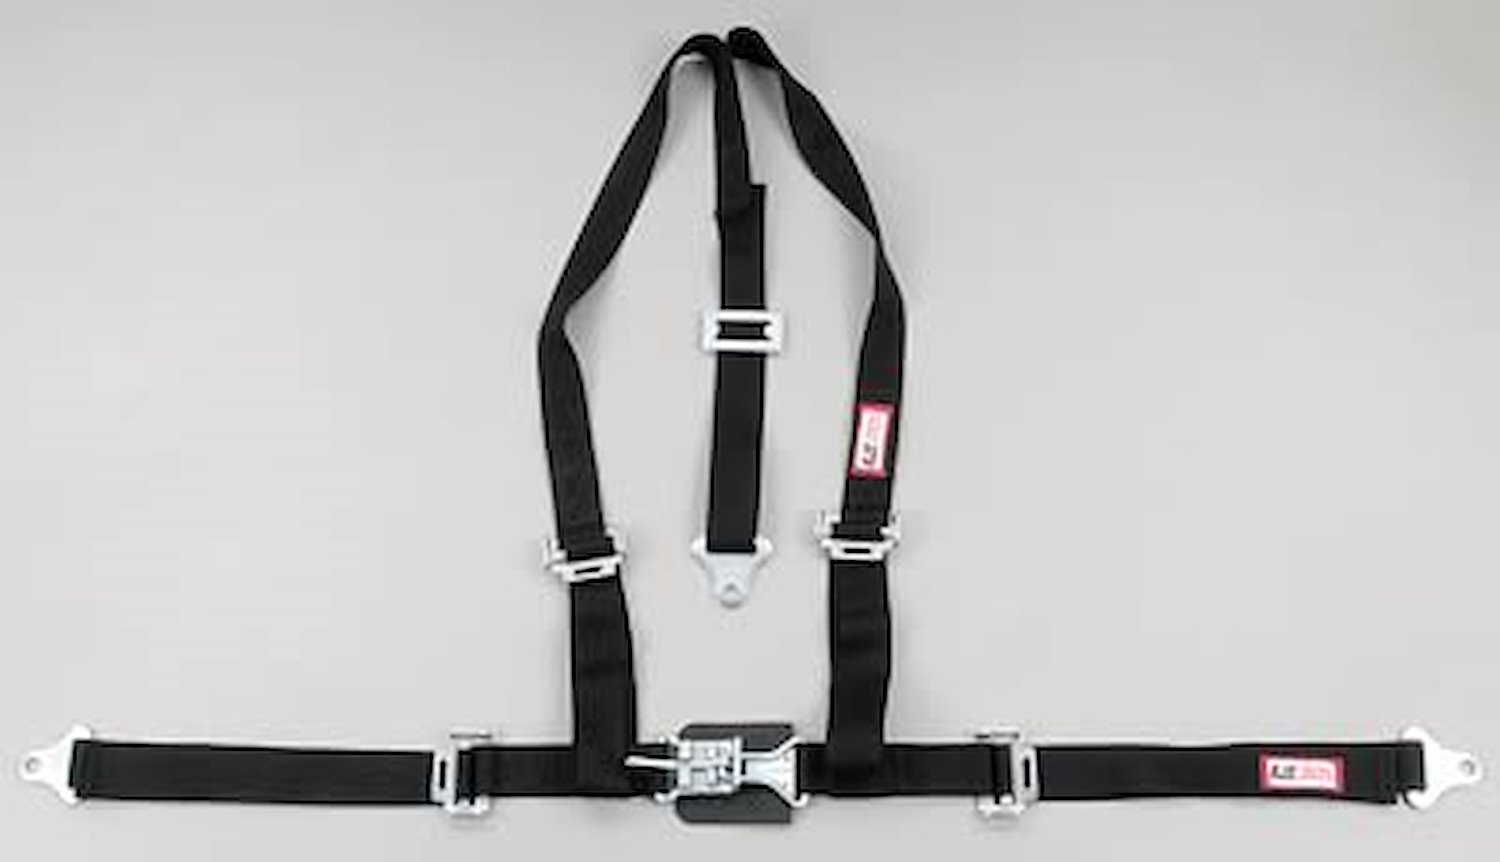 NON-SFI L&L HARNESS 3 PULL DOWN Lap Belt SEWN IN 2 S.H. Individual ROLL BAR Mount ALL WRAP ENDS GRAY